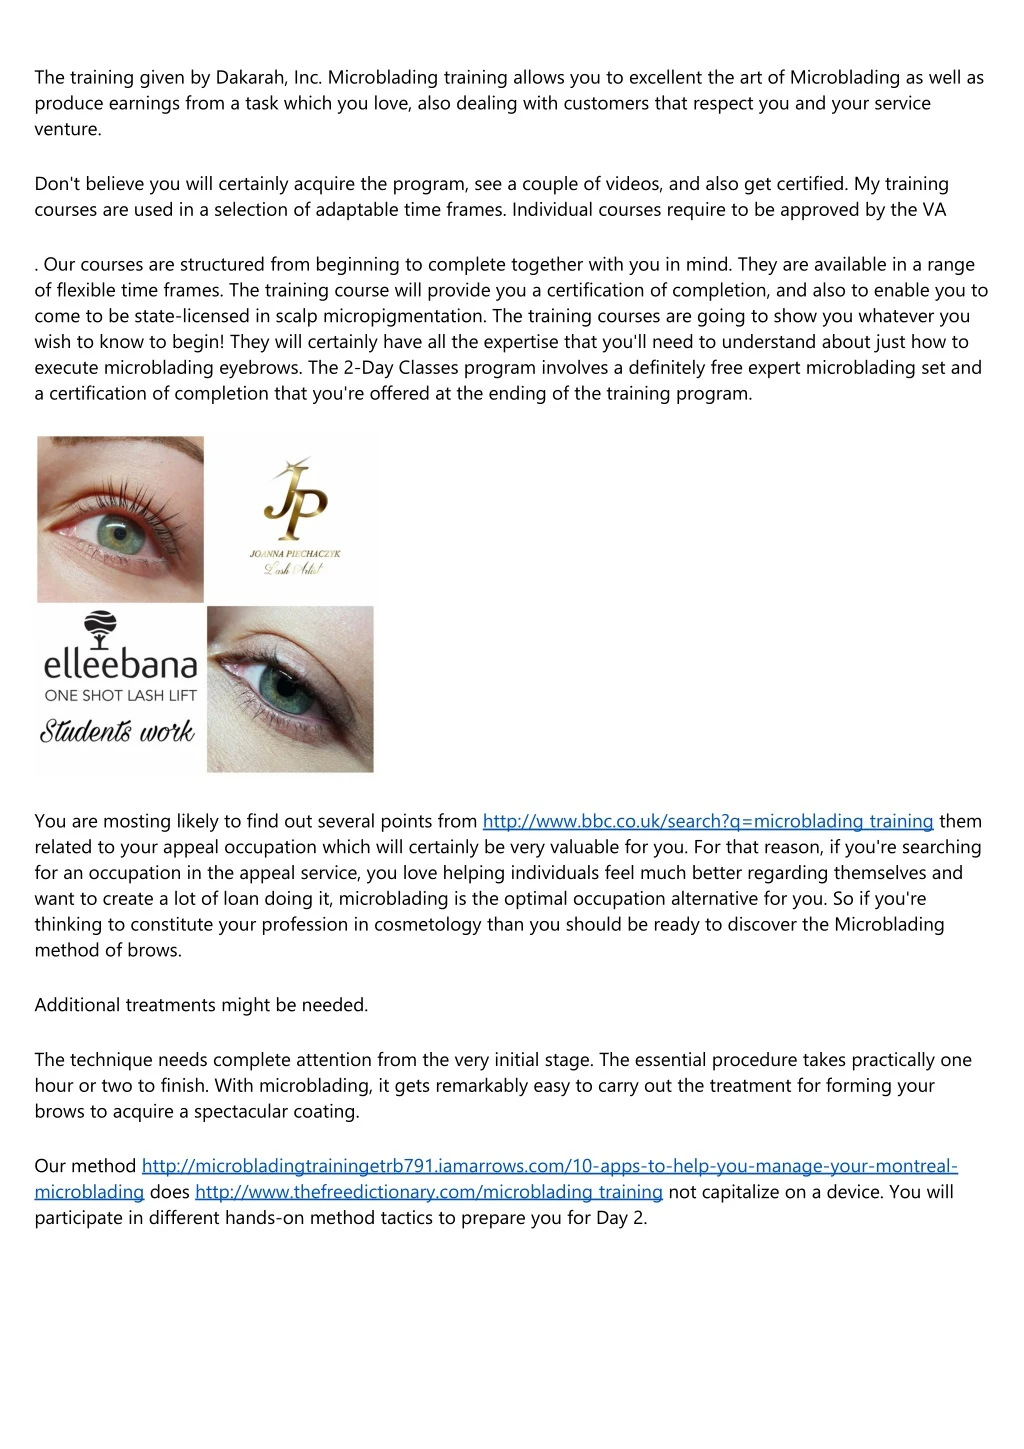 the training given by dakarah inc microblading